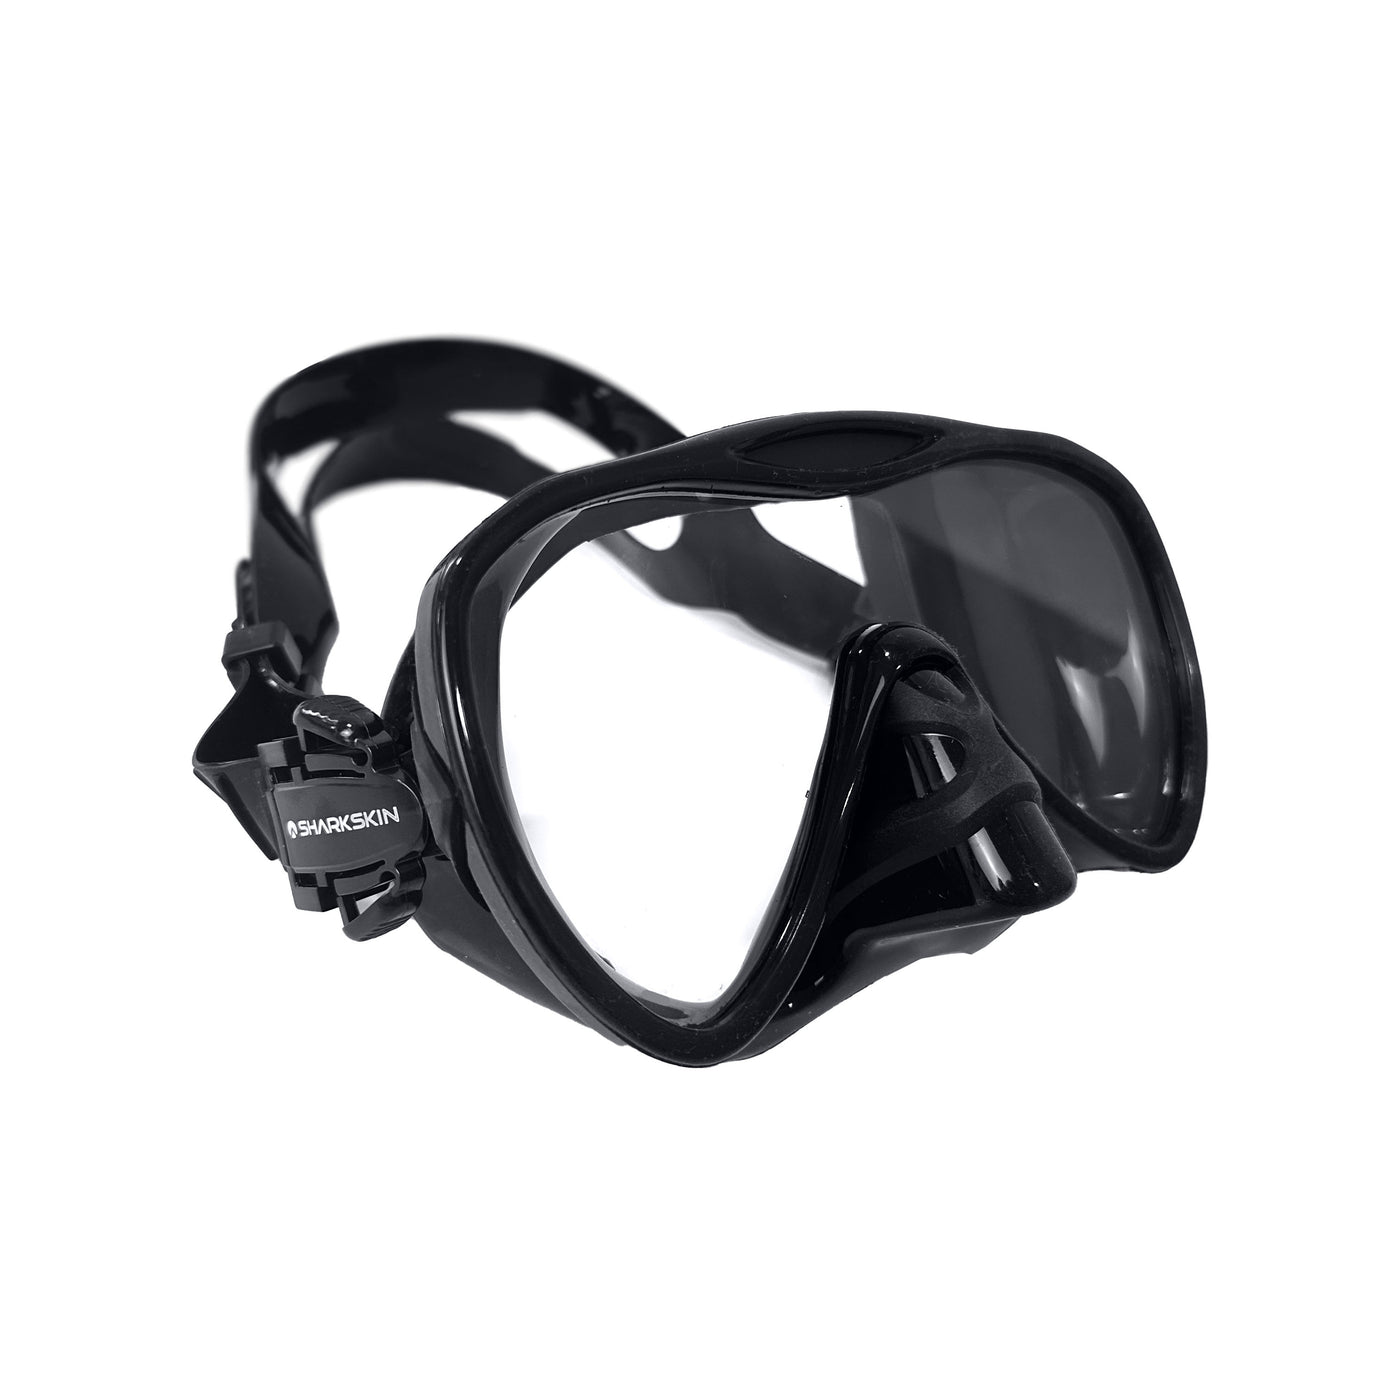 SHARKSKIN SOFTSEAL PLUS MASK AND SHARKSKIN EASYCLEAR DRY TOP SNORKEL WITH FREE ANTI-FOG